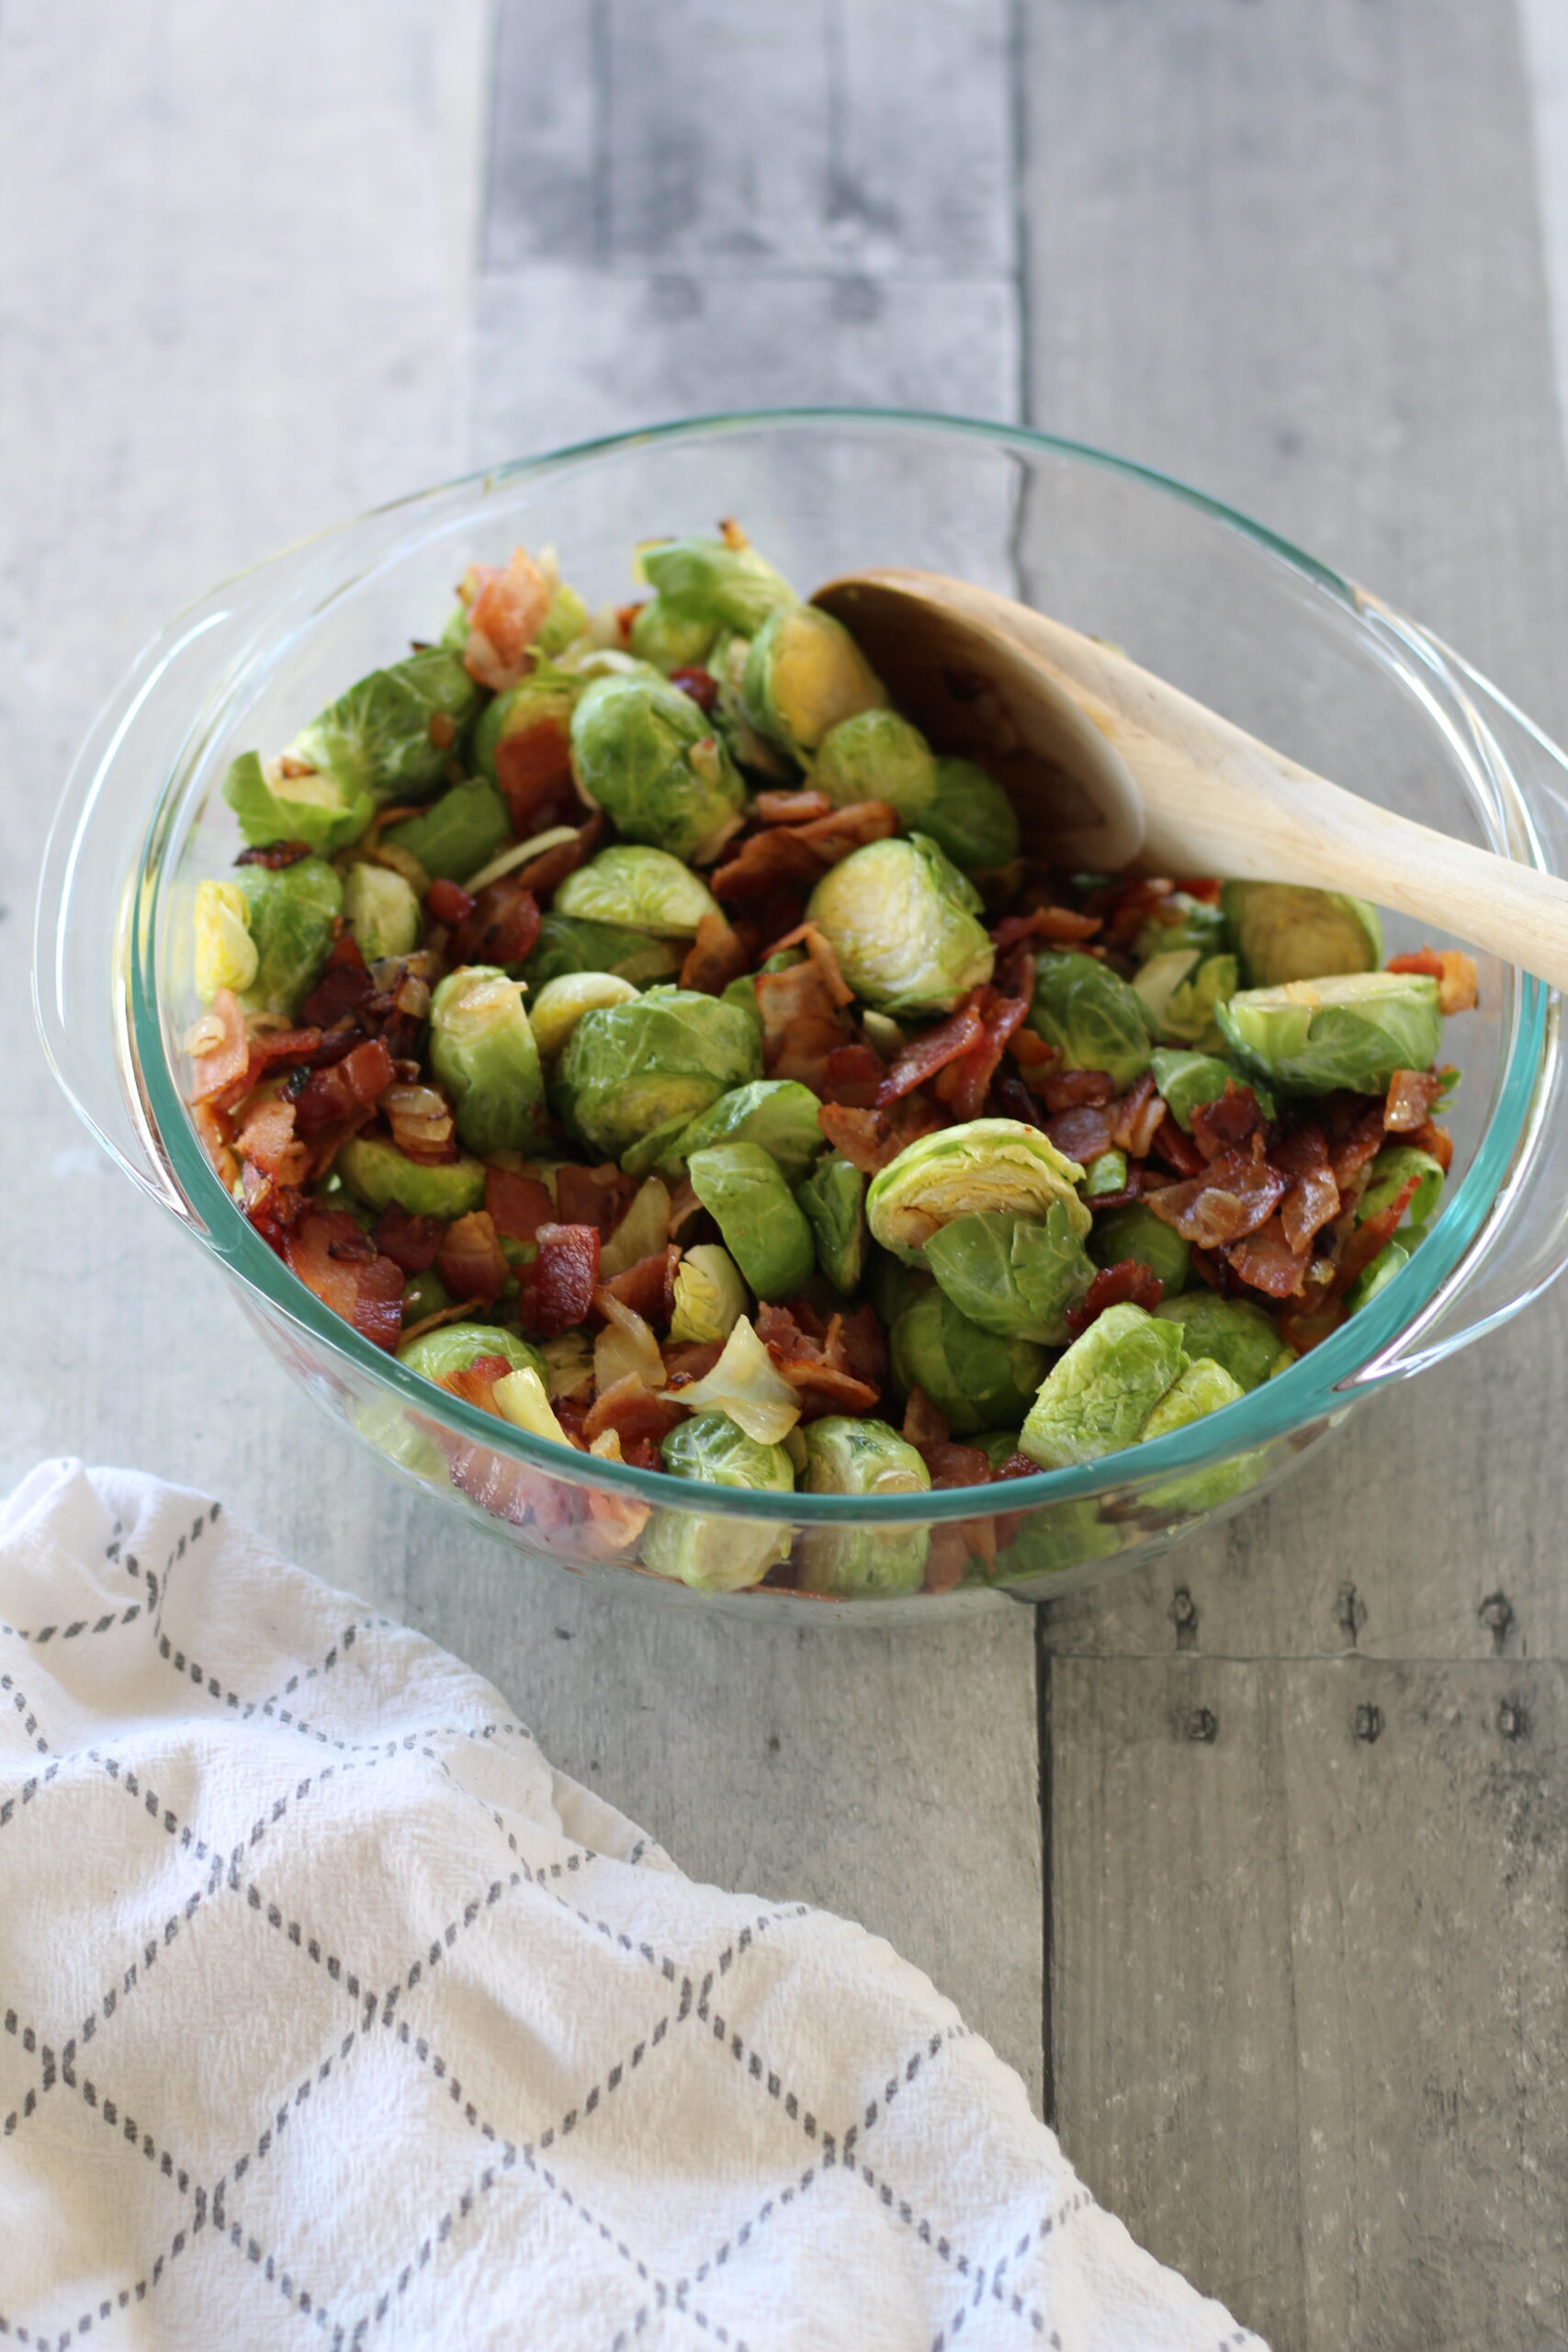 How to make Brussel sprouts 